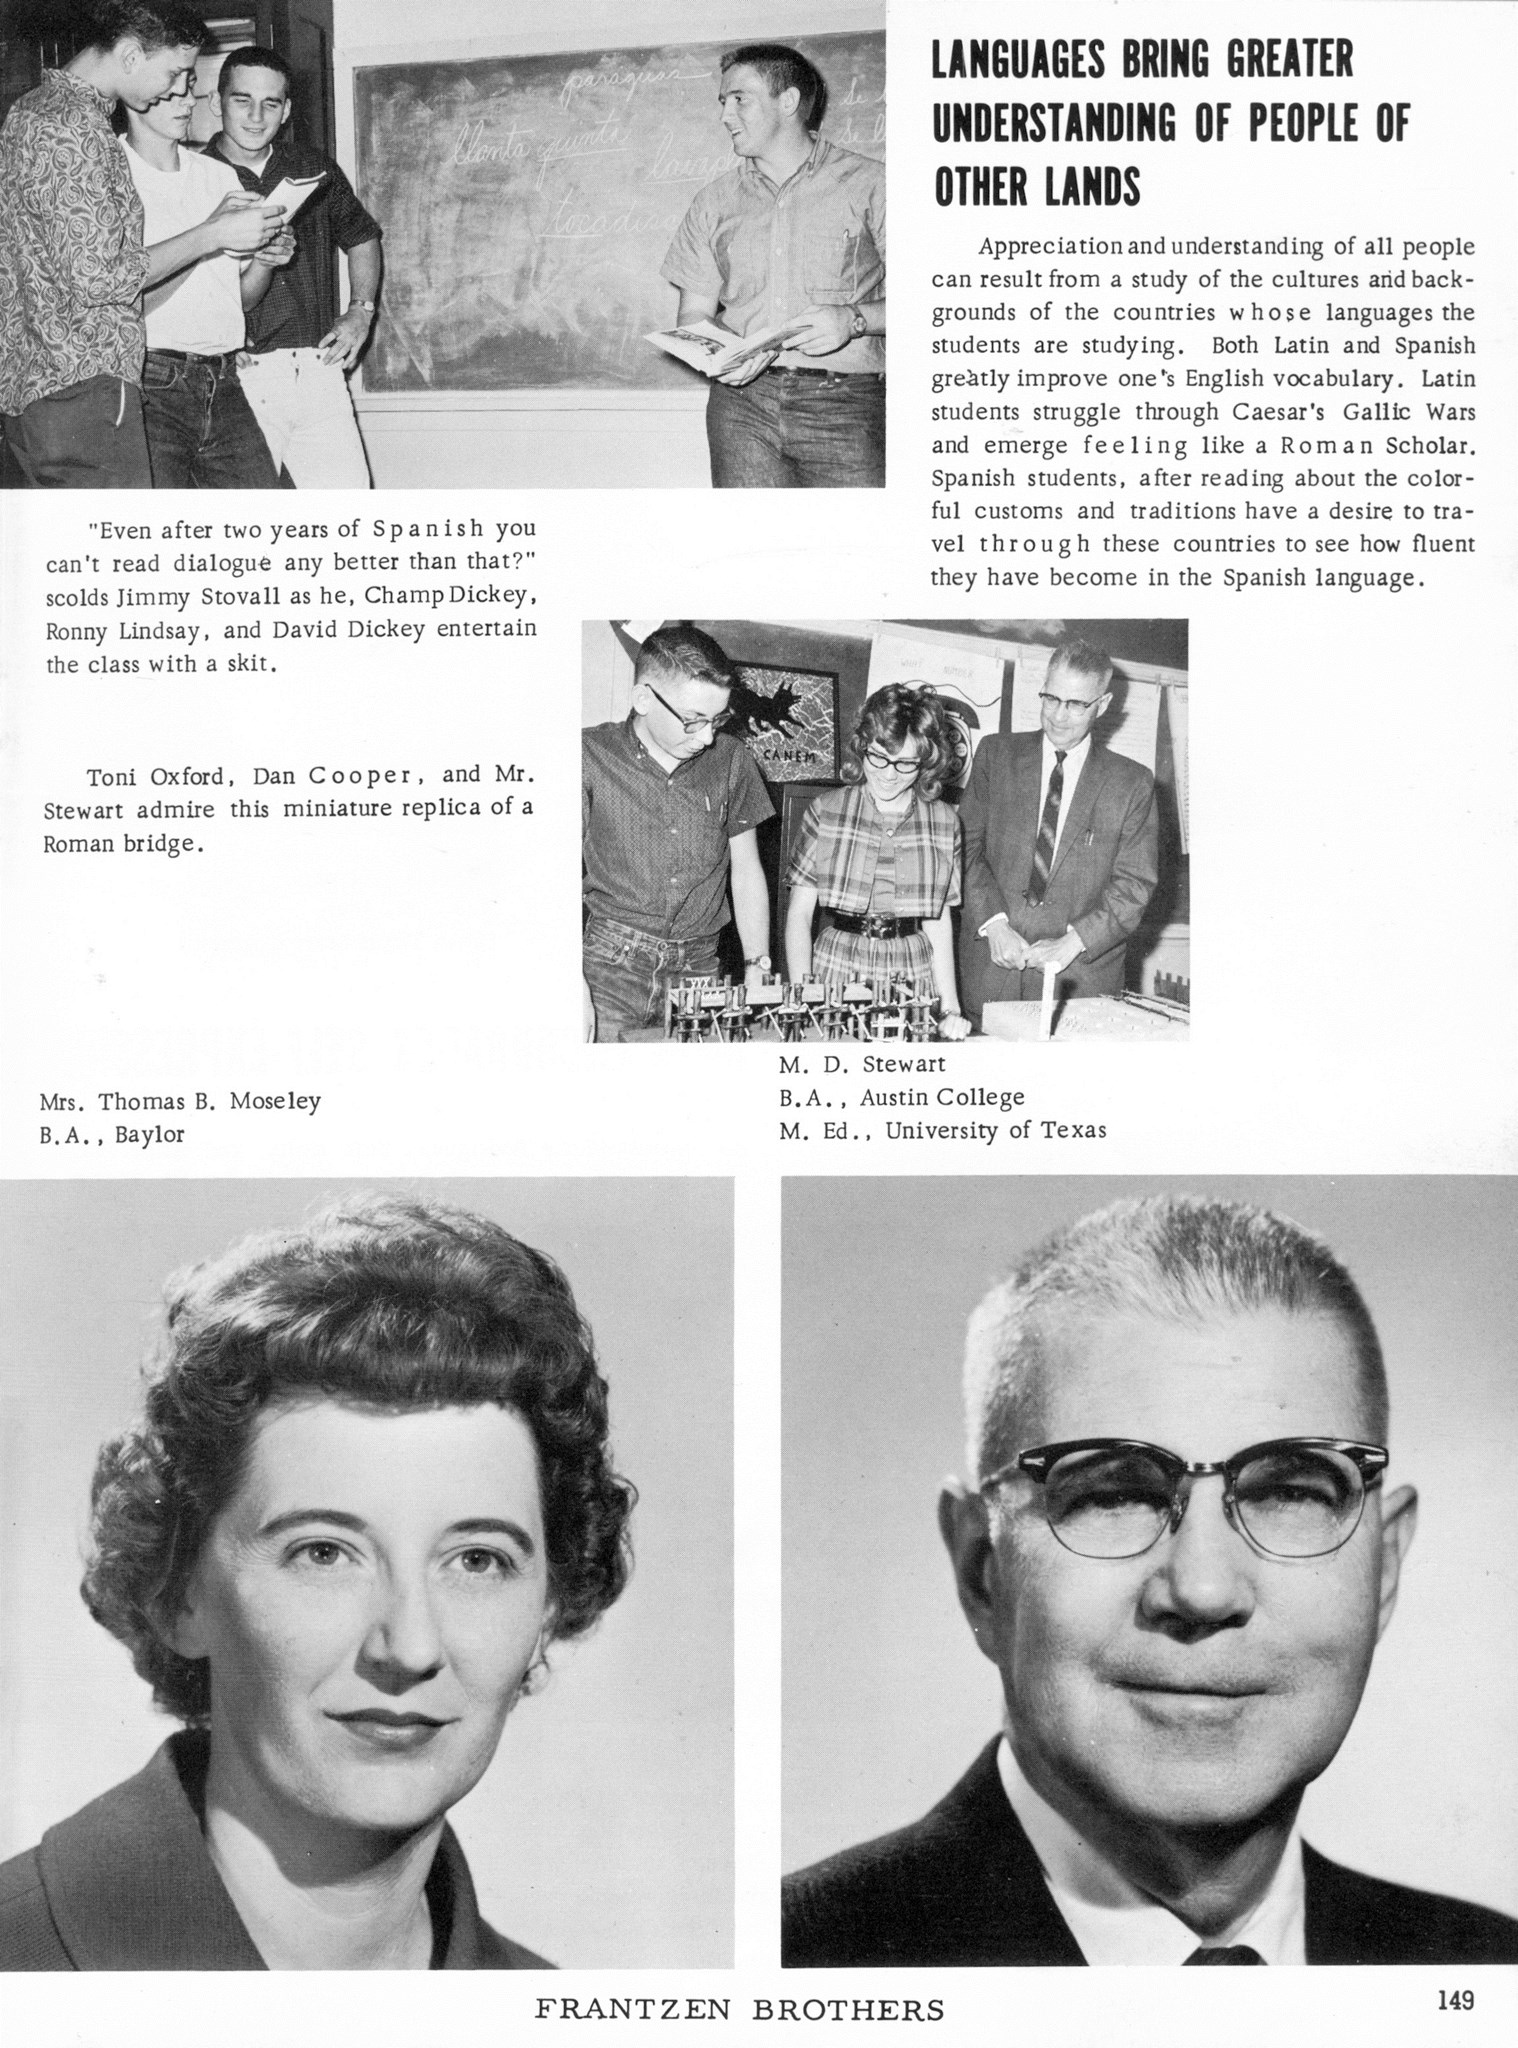 ../../../Images/Large/1963/Arclight-1963-pg0149.jpg